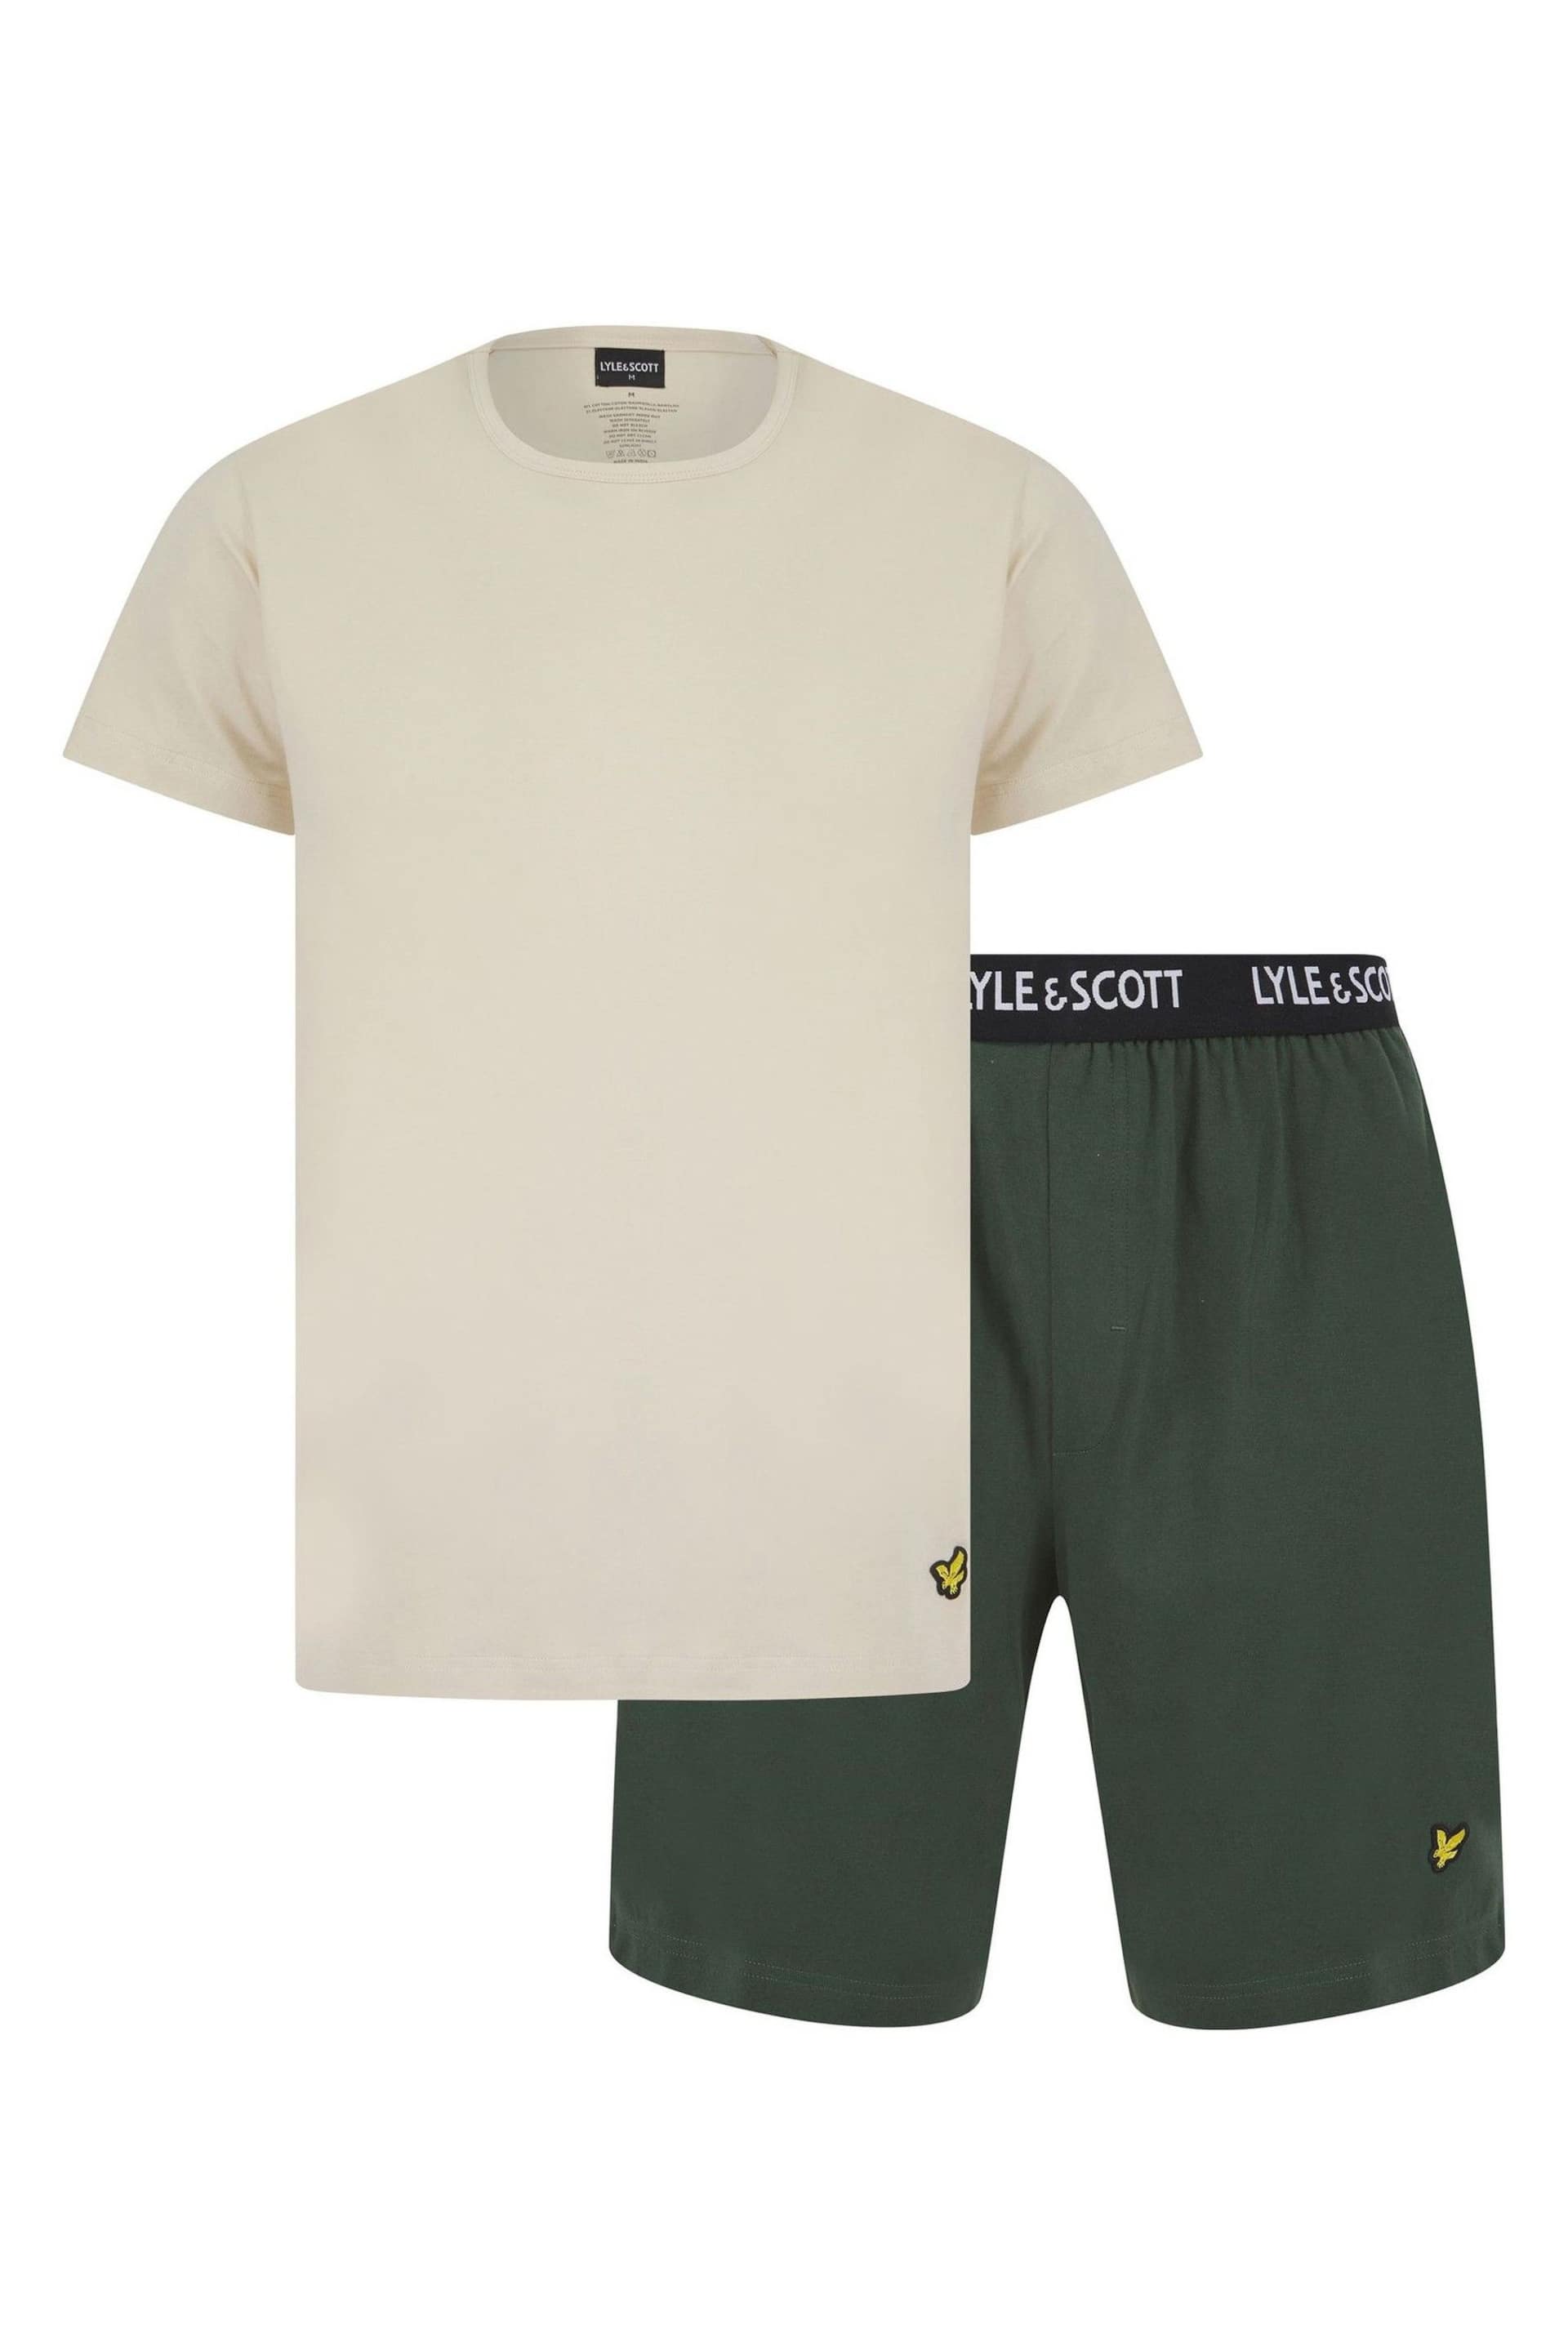 Lyle and Scott Green Charlie T-Shirt and Short Set - Image 1 of 6